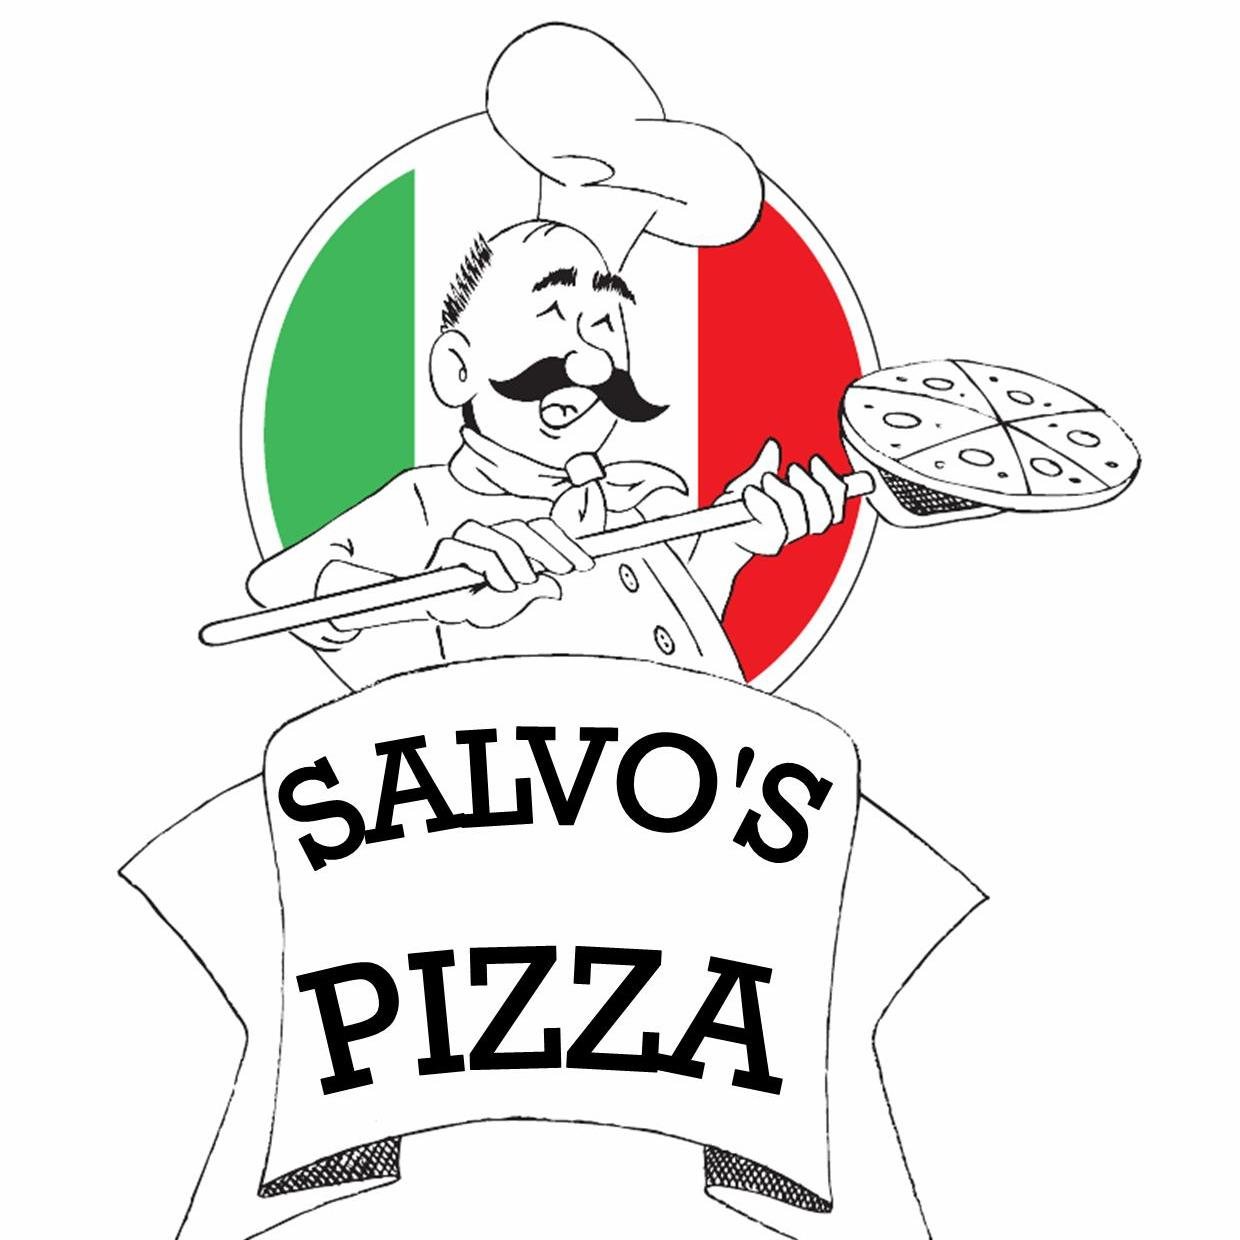 Salvo's has been a locally owned business for over 37 years!We pride ourselves on our authentic NY style pizza made using only the finest & freshest ingredients